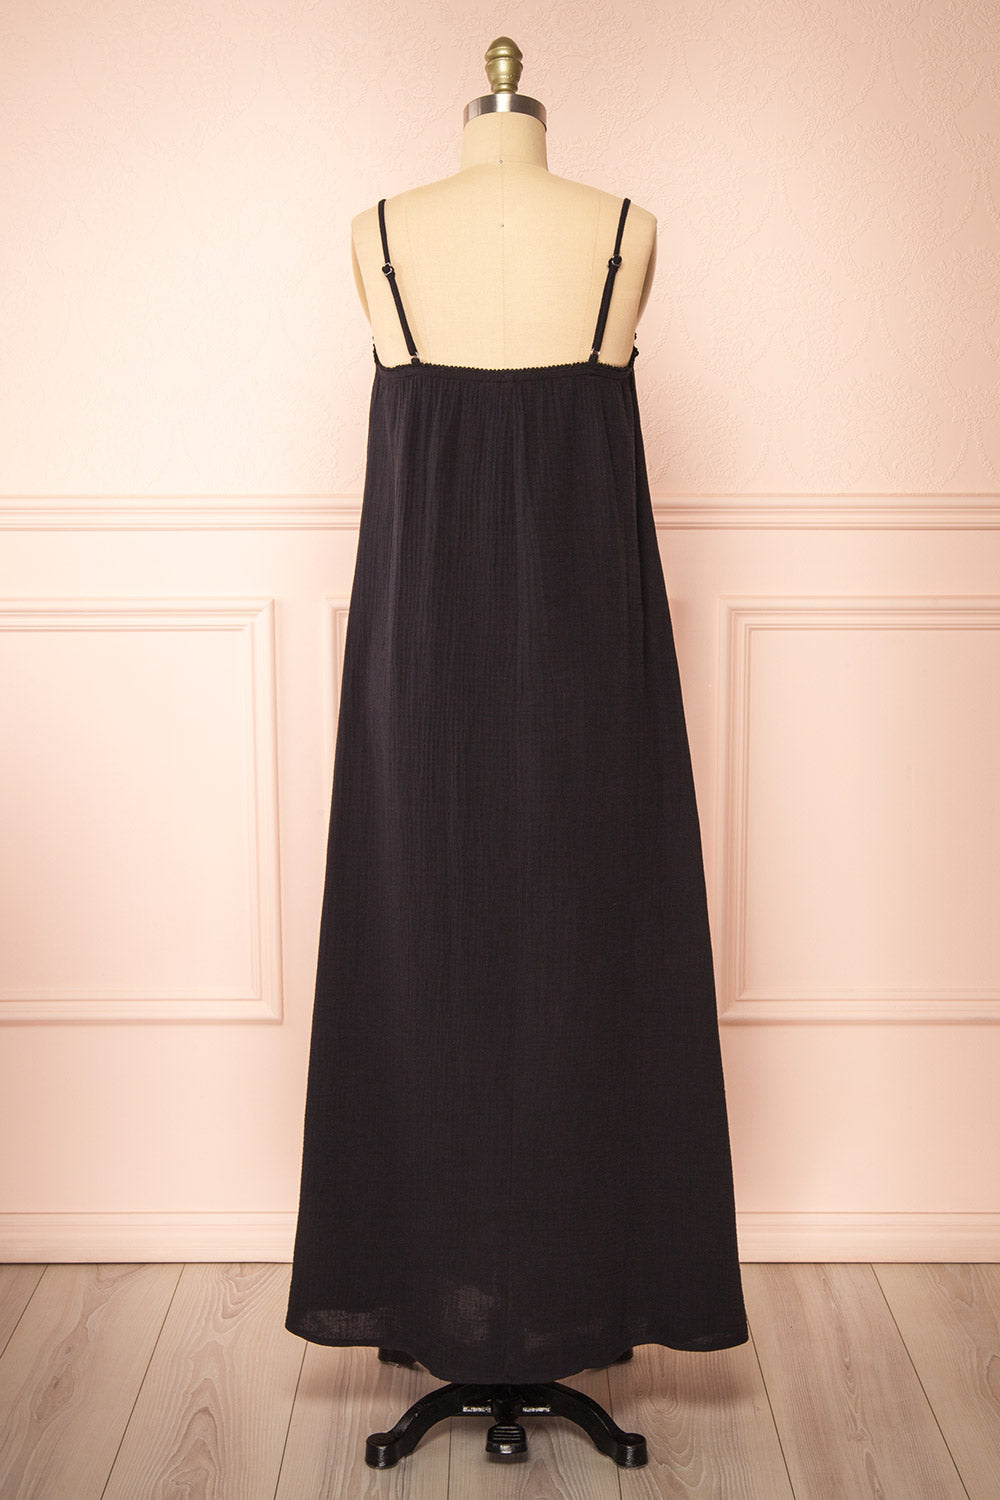 Marinet Black Long Loose-Fitted Dress | Boutique 1861 back view